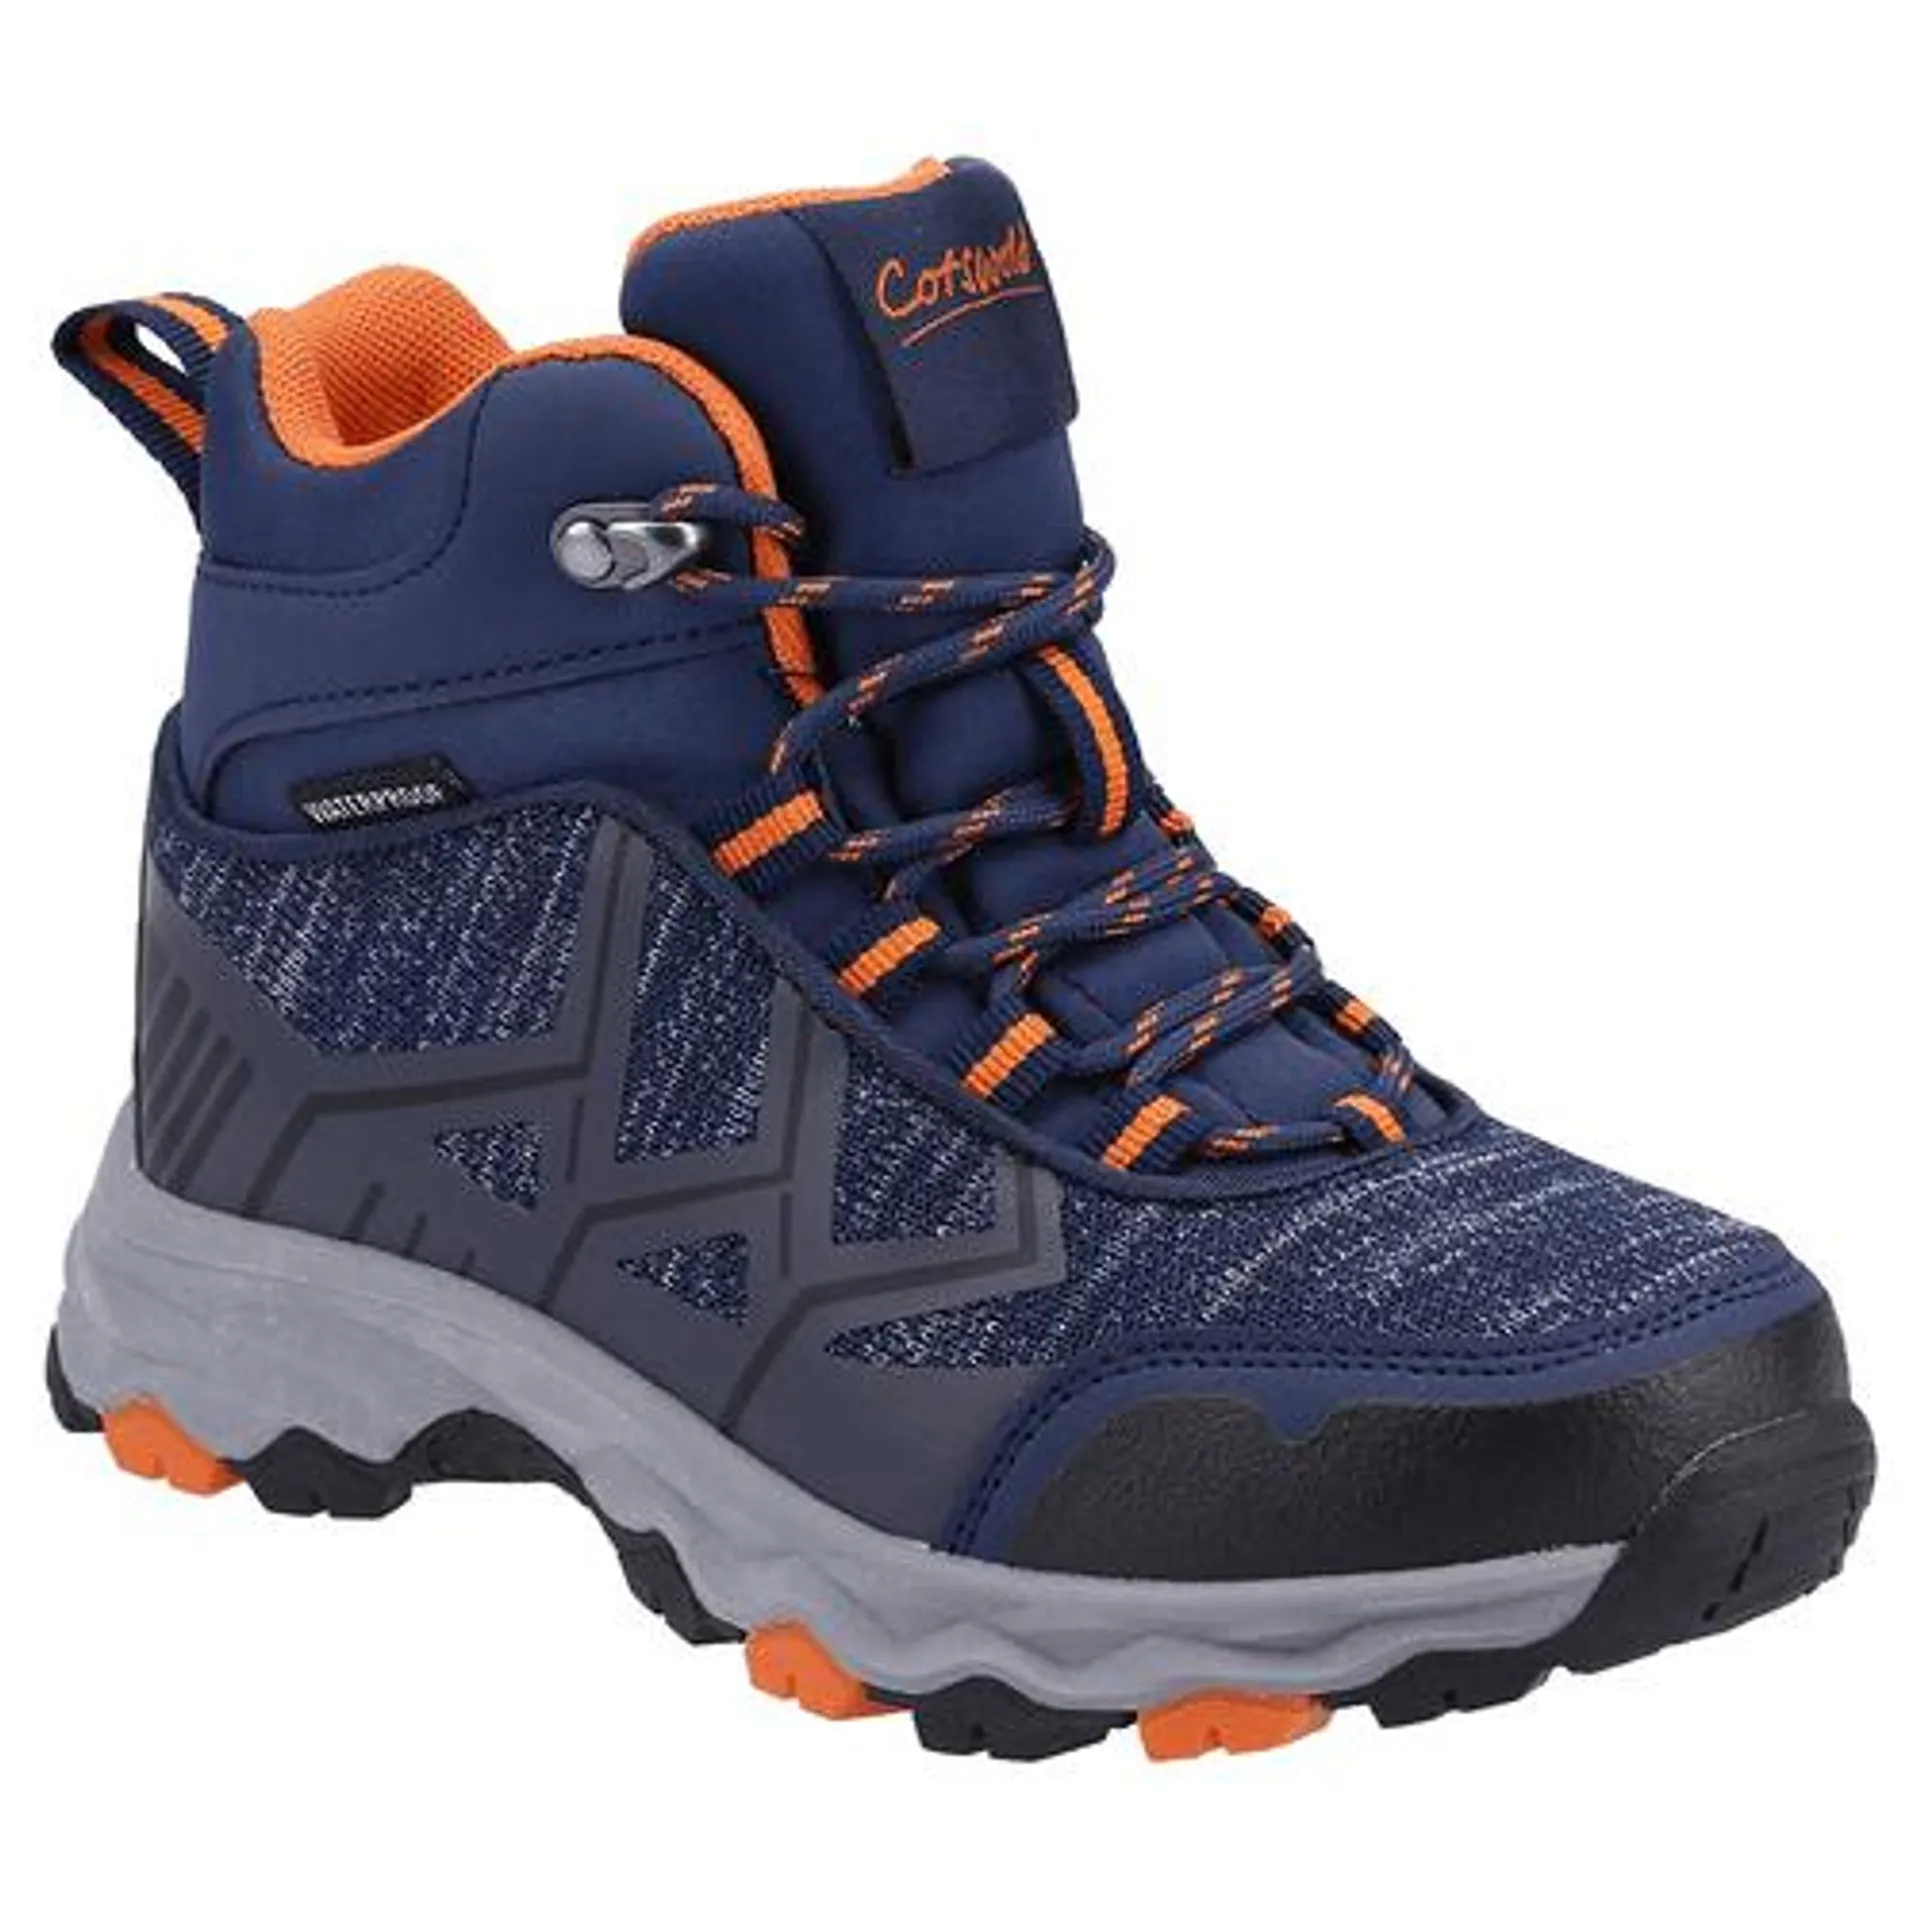 Cotswold Coaley Lace Hiking Boots